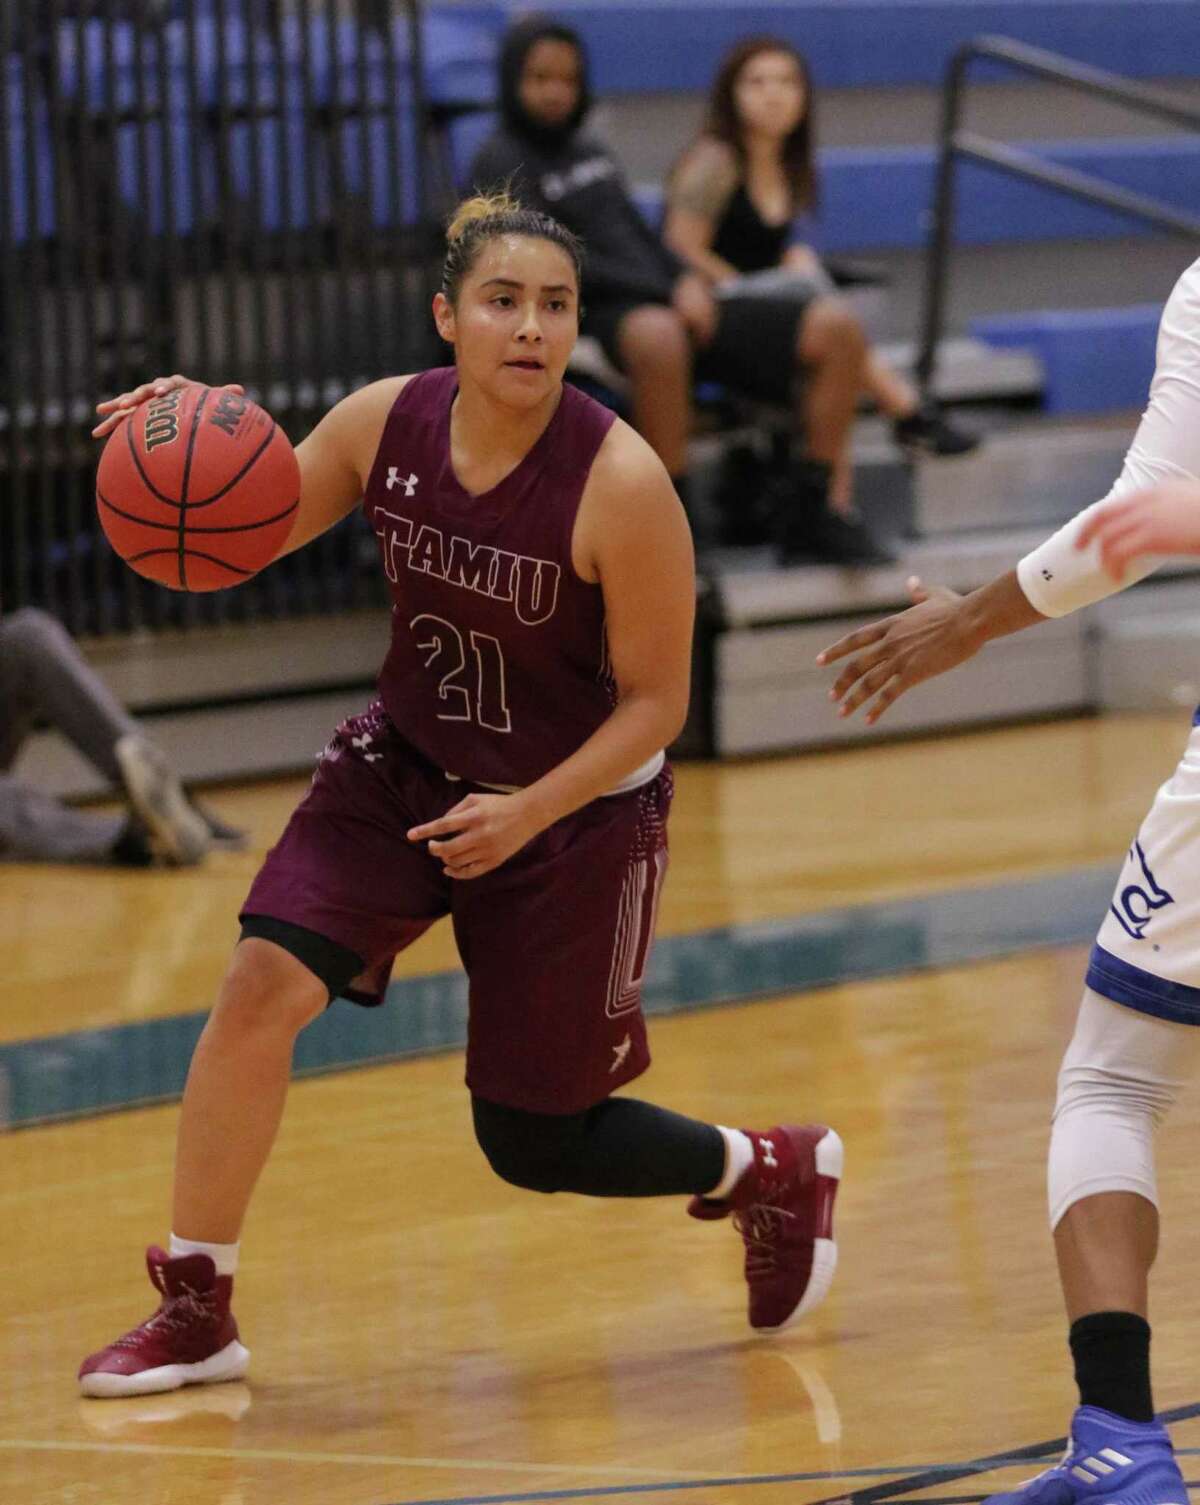 TAMIU women's basketball 'reinvented' after 2 tough years